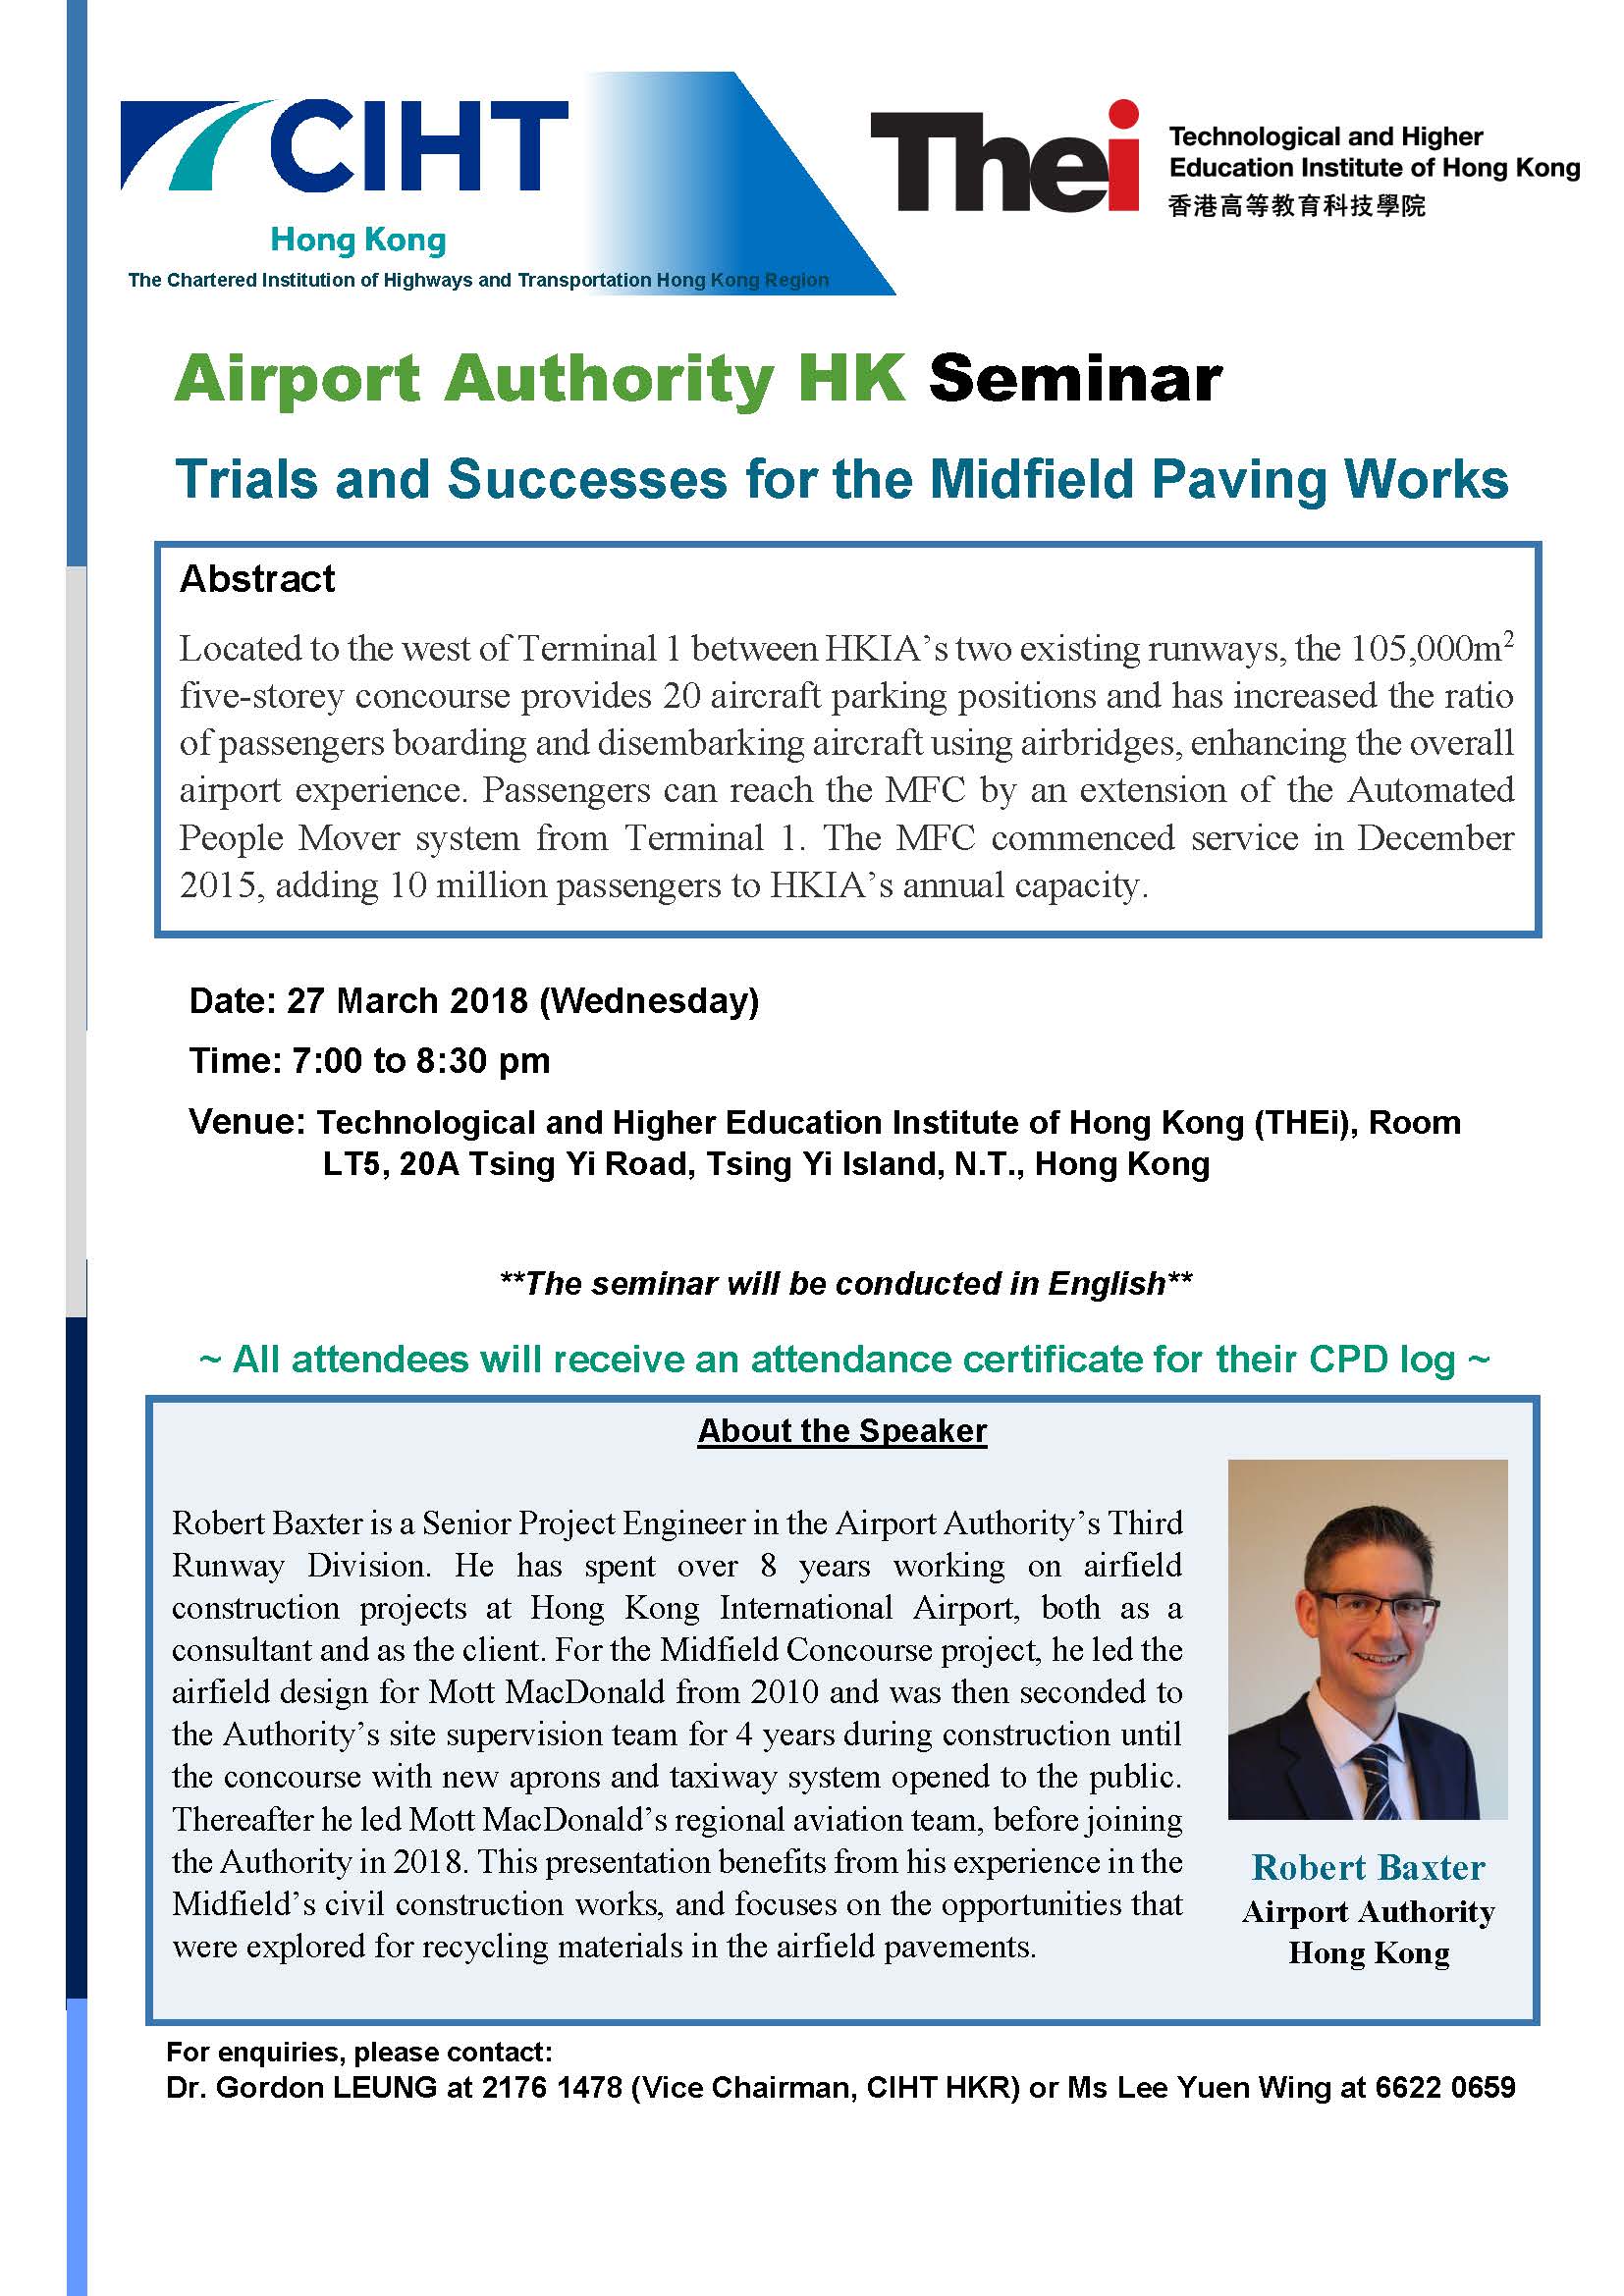 Airport Authority HK Seminar - Trials and Successes for the Midfield Paving Works